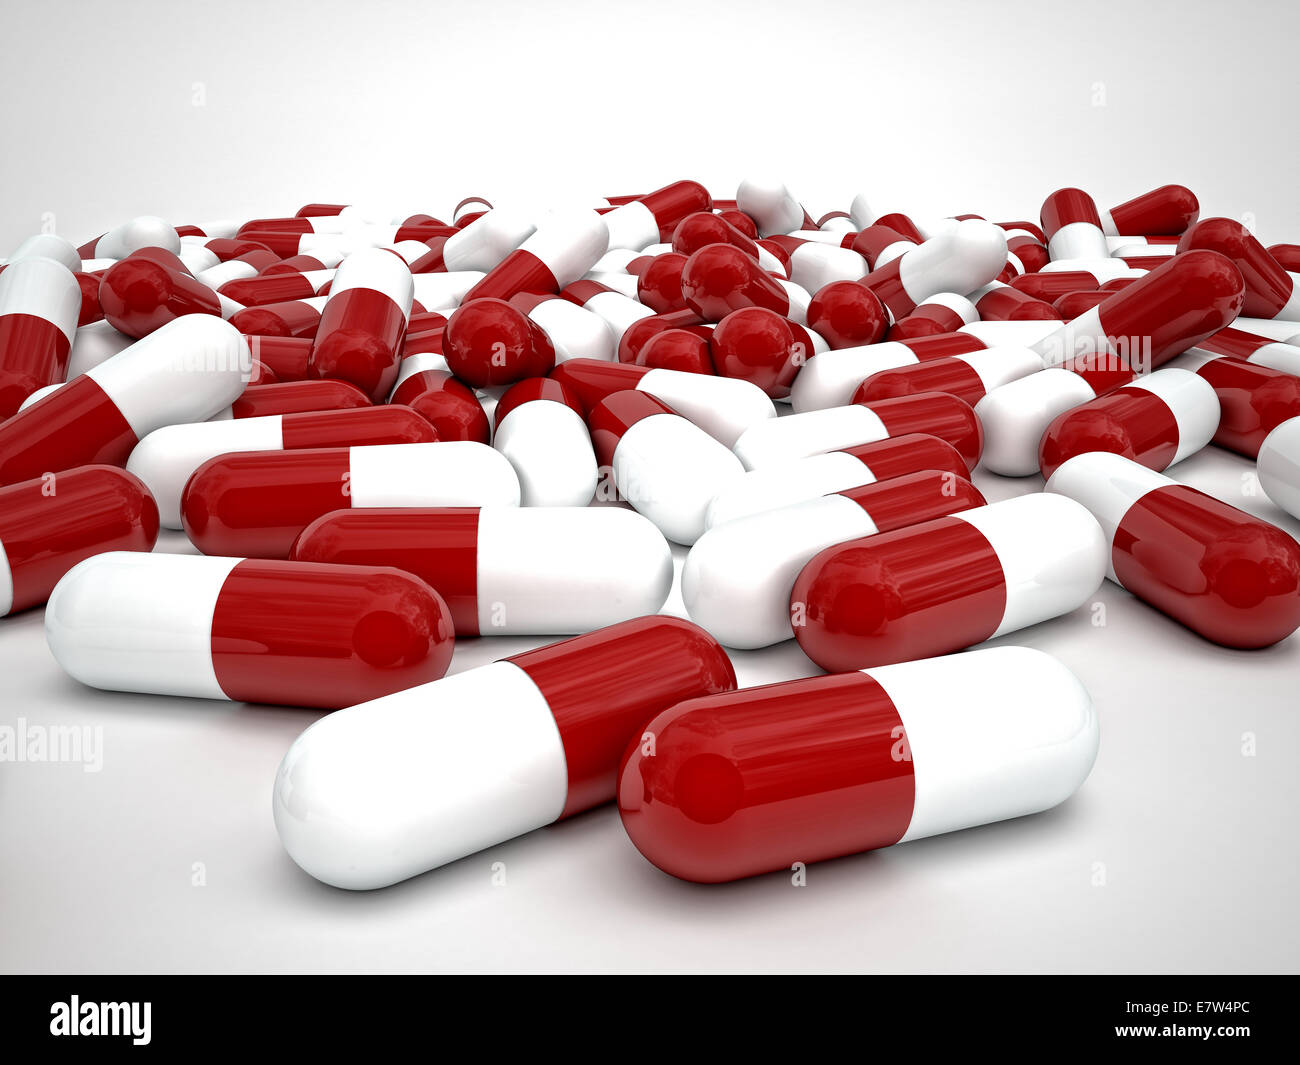 3d image of pills medicine on white background Stock Photo